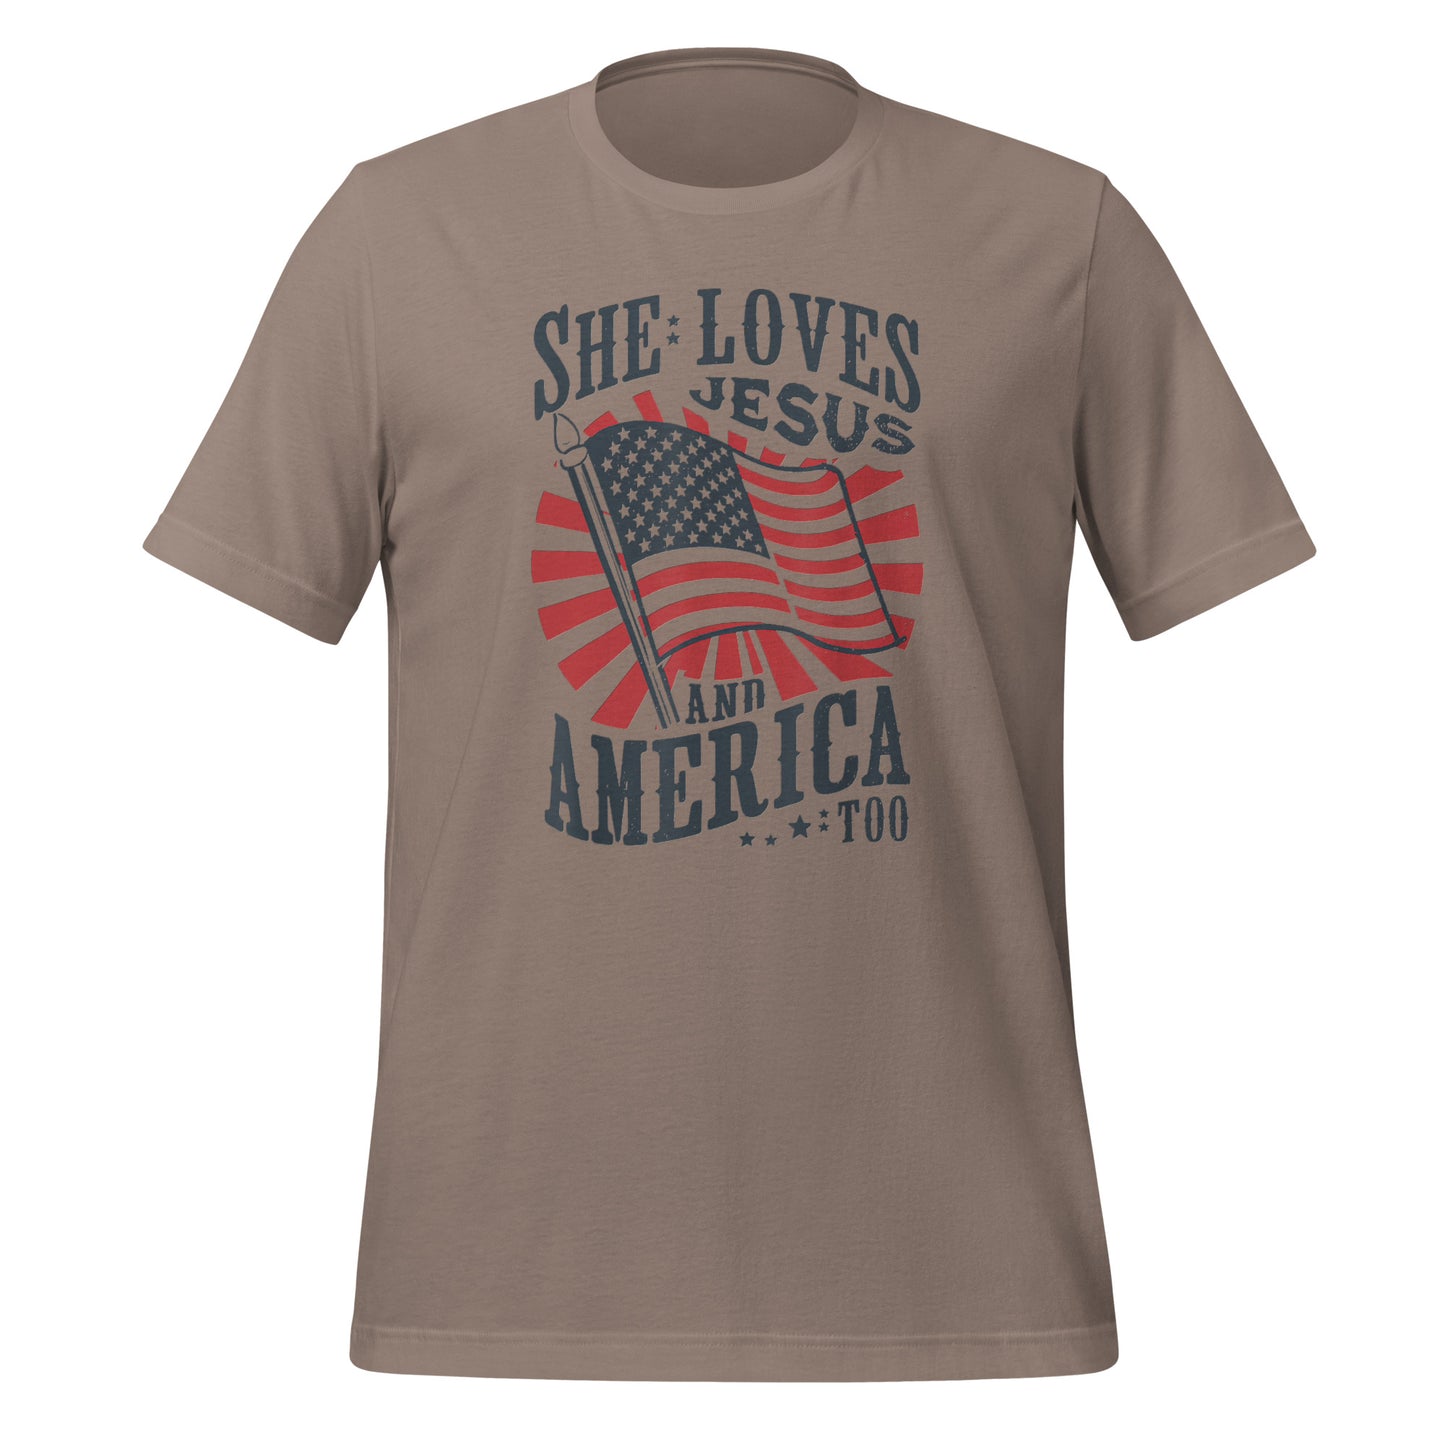 She loves Jesus and America Too, Unisex t-shirt